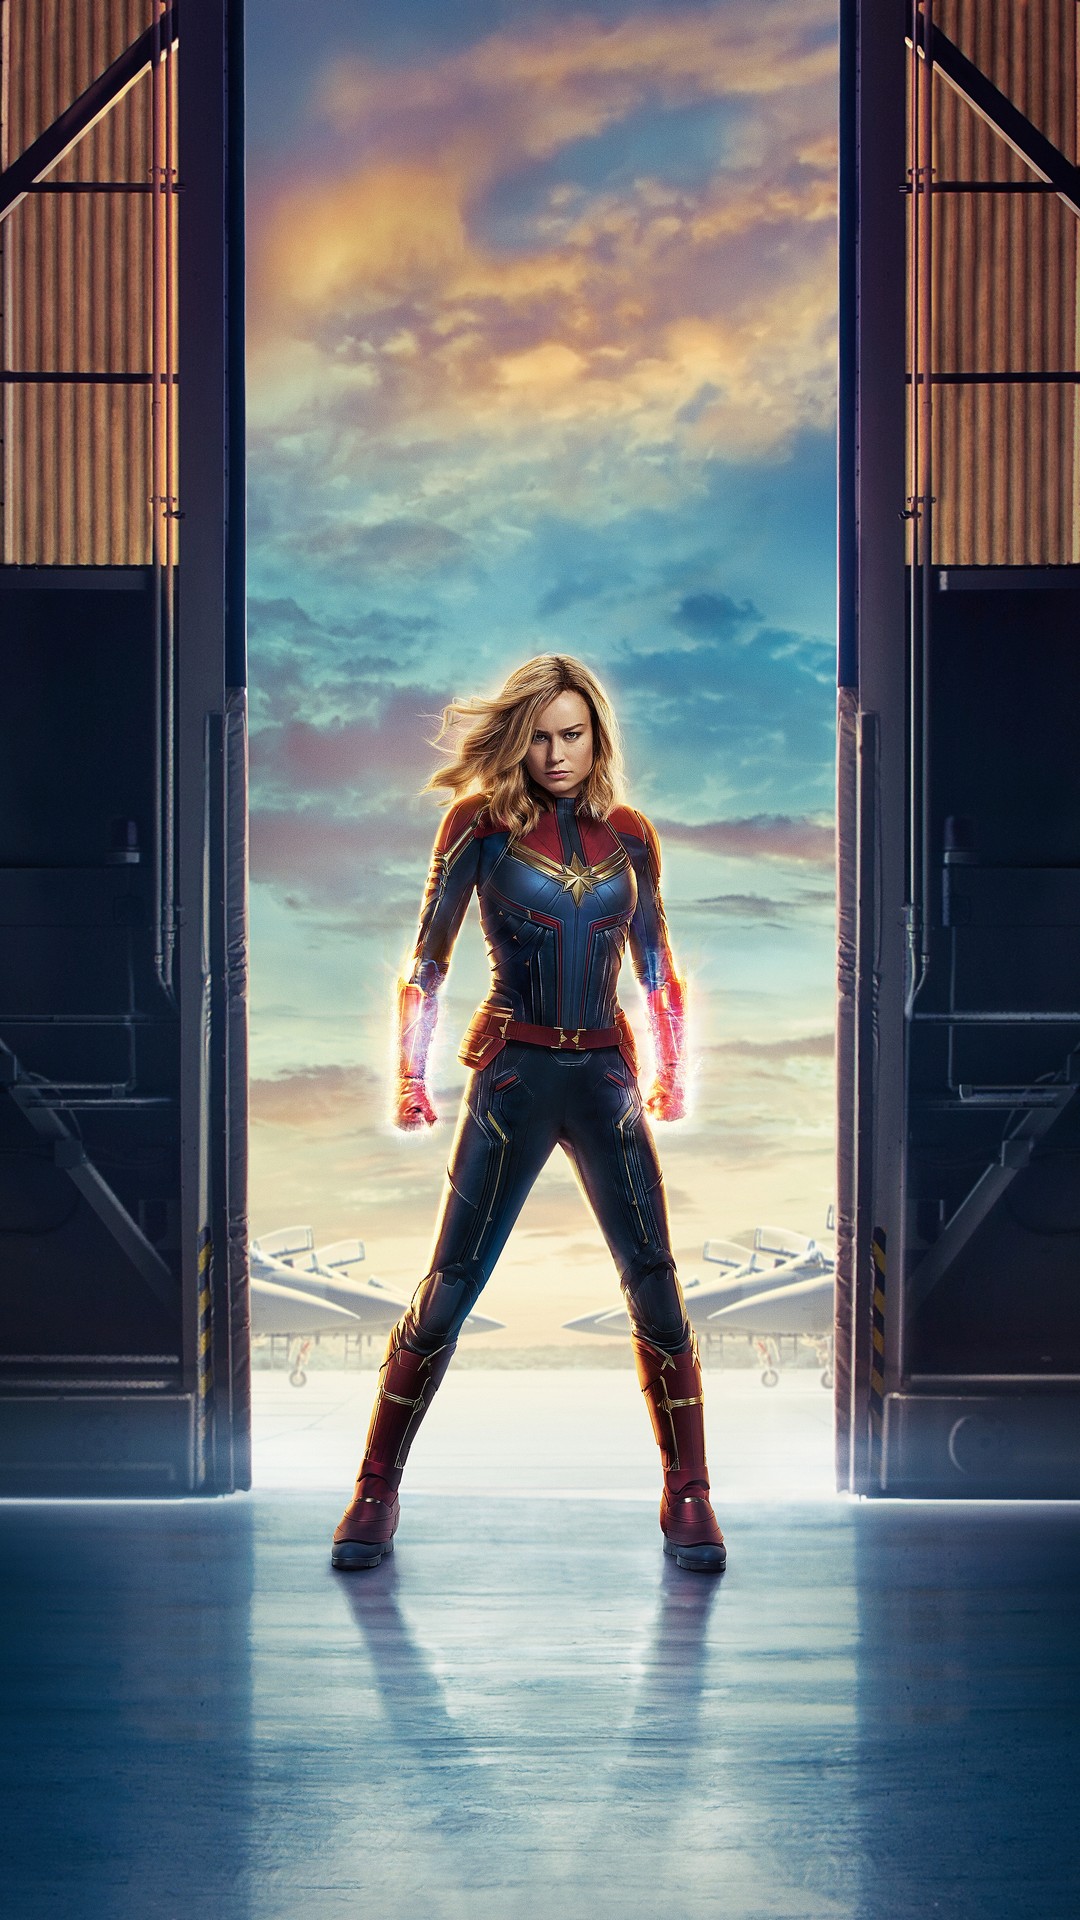 Captain Marvel Phone Wallpaper with high-resolution 1080x1920 pixel. You can use this wallpaper for your Windows and Mac OS computers as well as your Android and iPhone smartphones